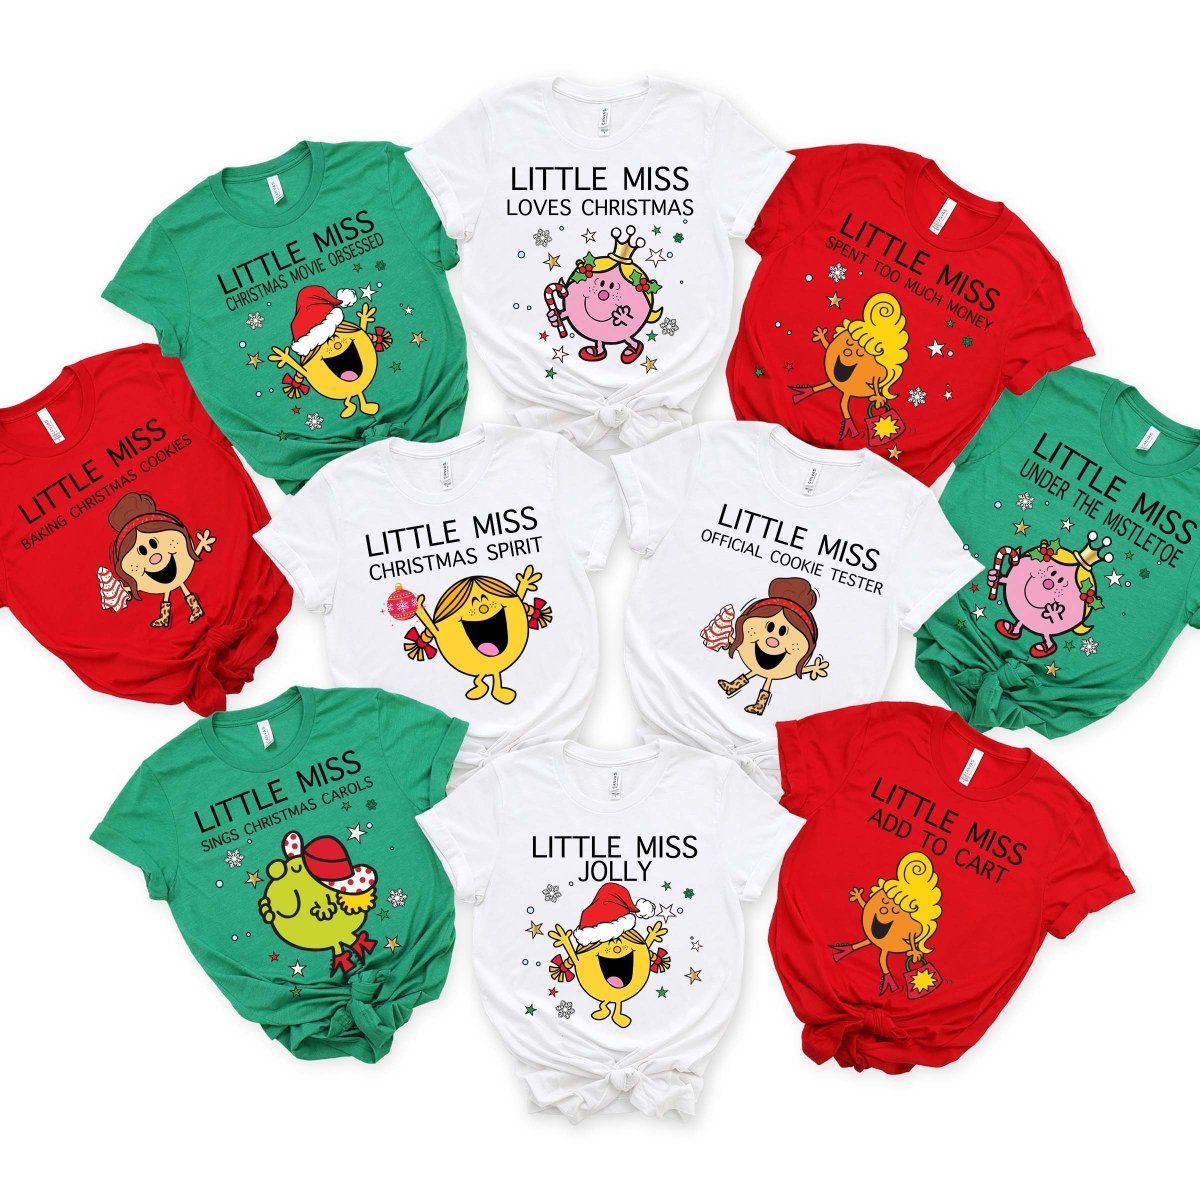 Little Miss Watches Christmas Movies All Day Wholesale Tee Design #18 - Limeberry Designs